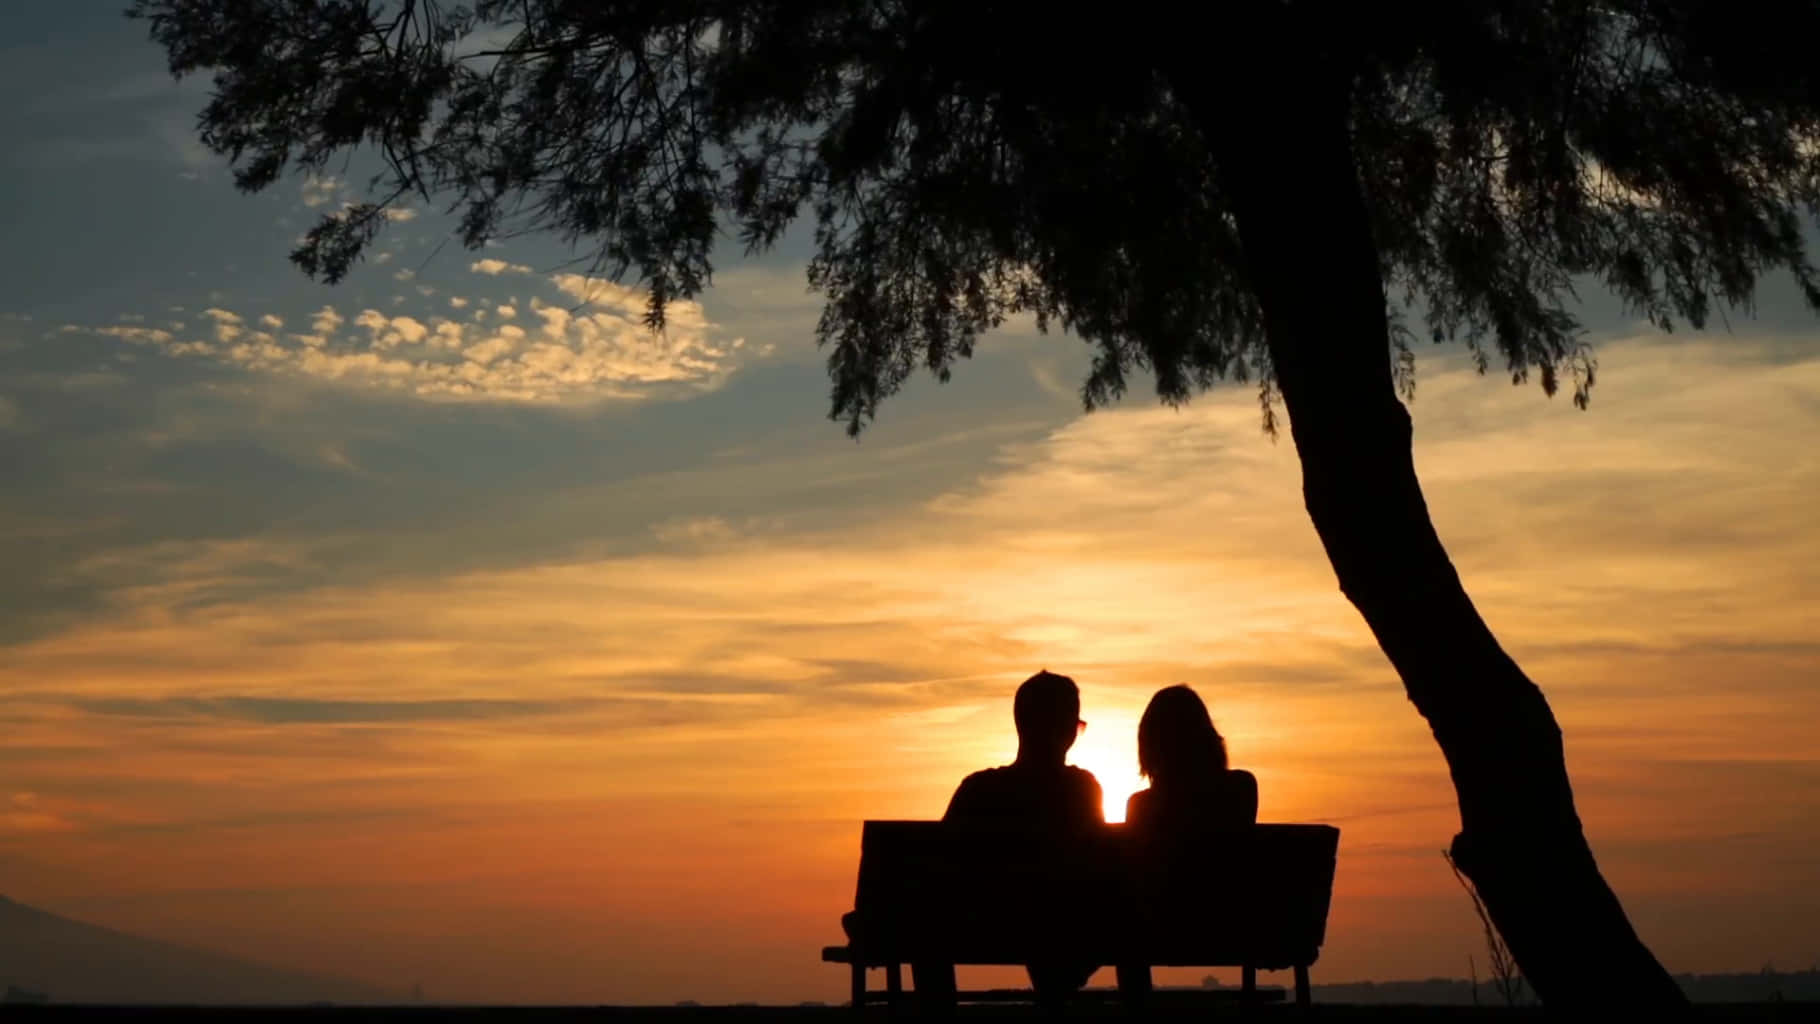 Couple watching the beautiful sunset at the beach.